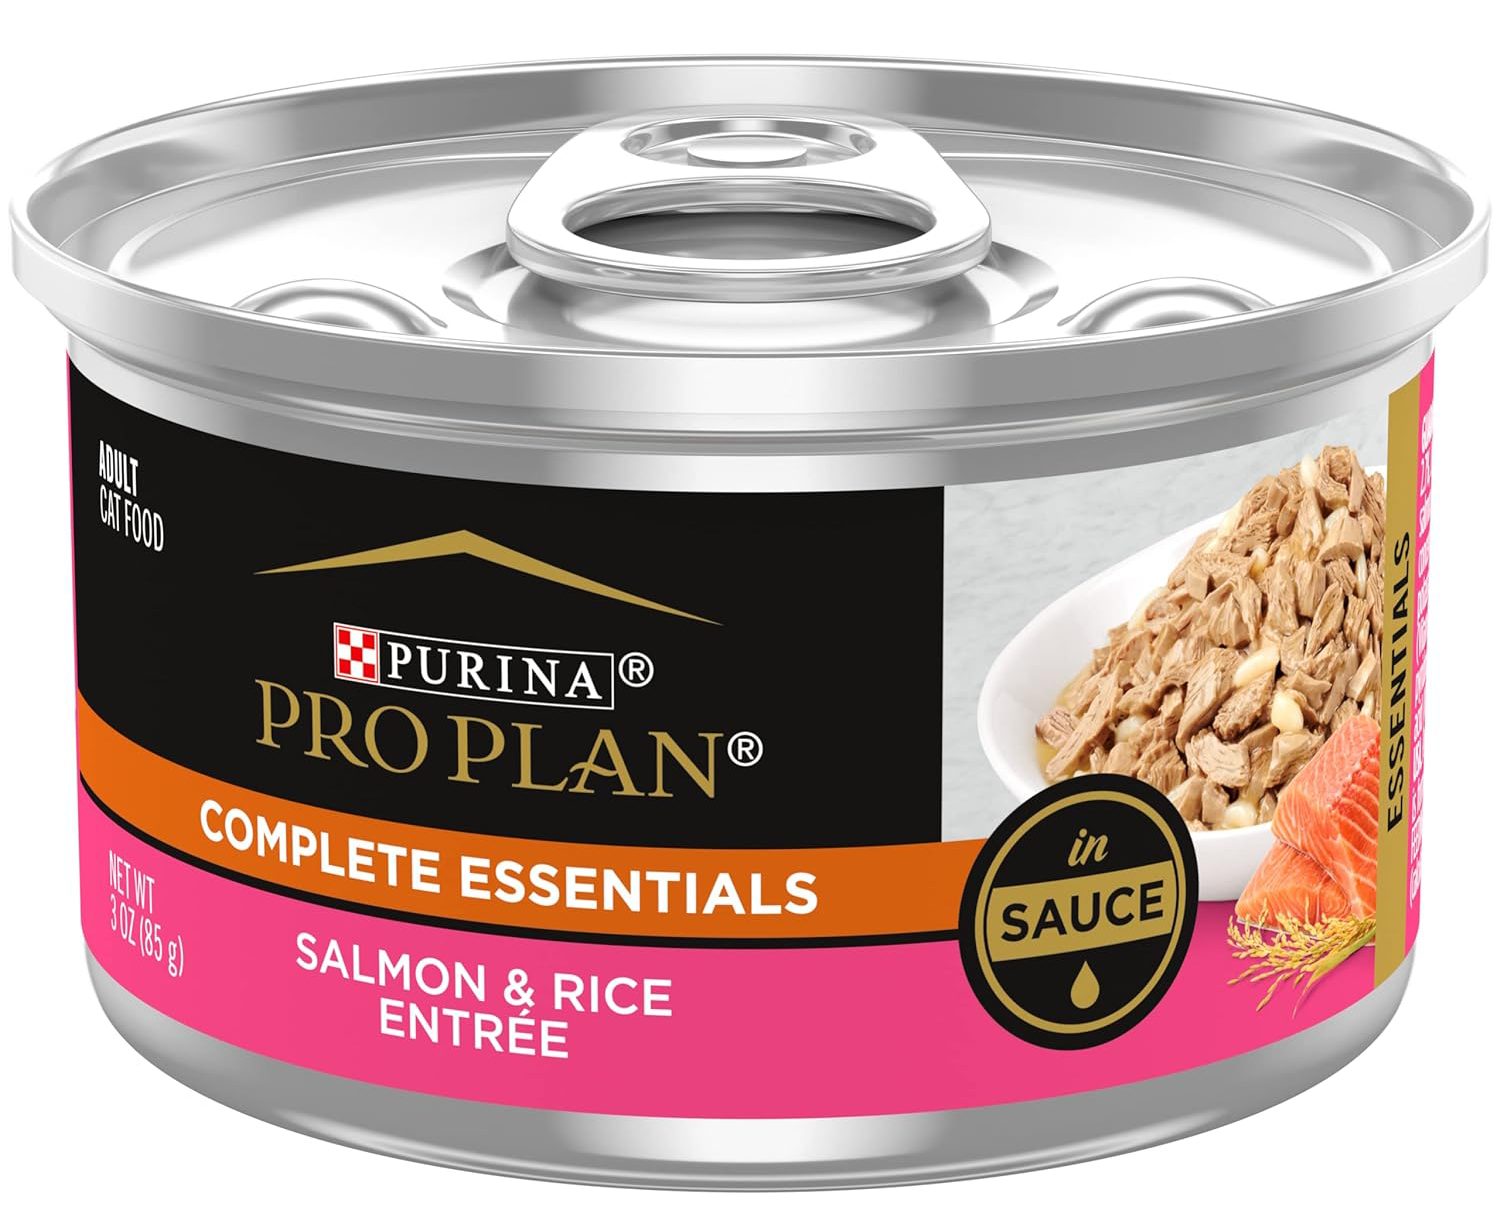 Purina Pro Plan Adult Complete Essentials Salmon & Rice Entrée in Sauce Canned Cat Food